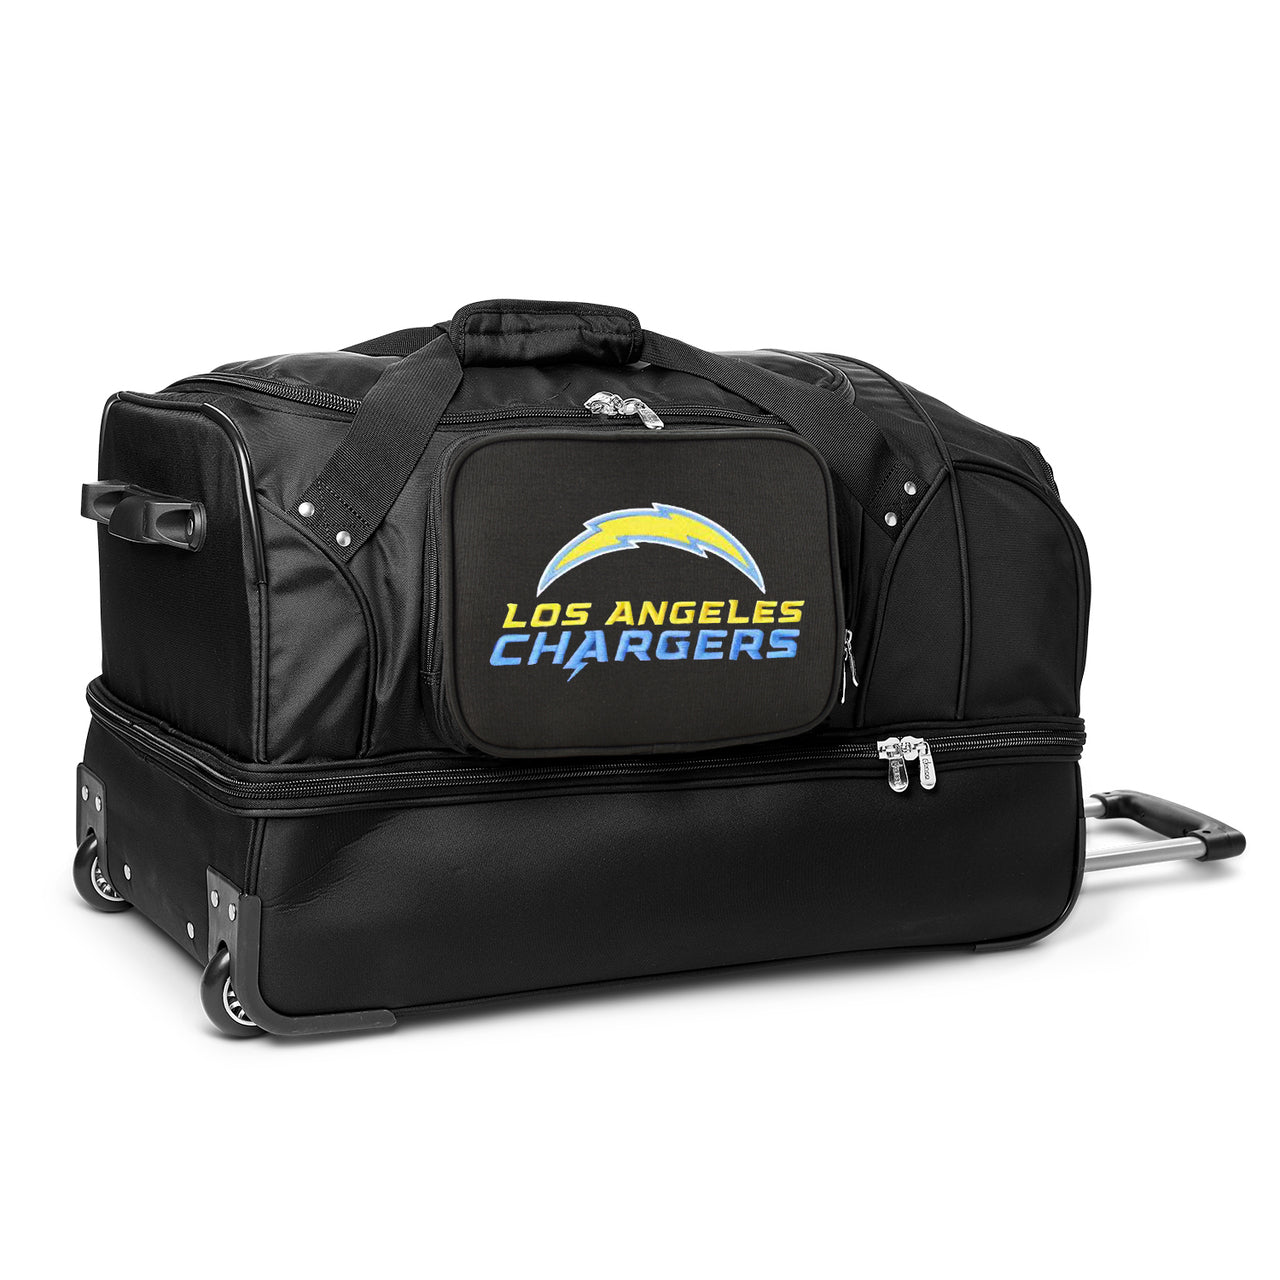 NFL Los Angeles Chargers Luggage | NFL Los Angeles Chargers Wheeled Luggage